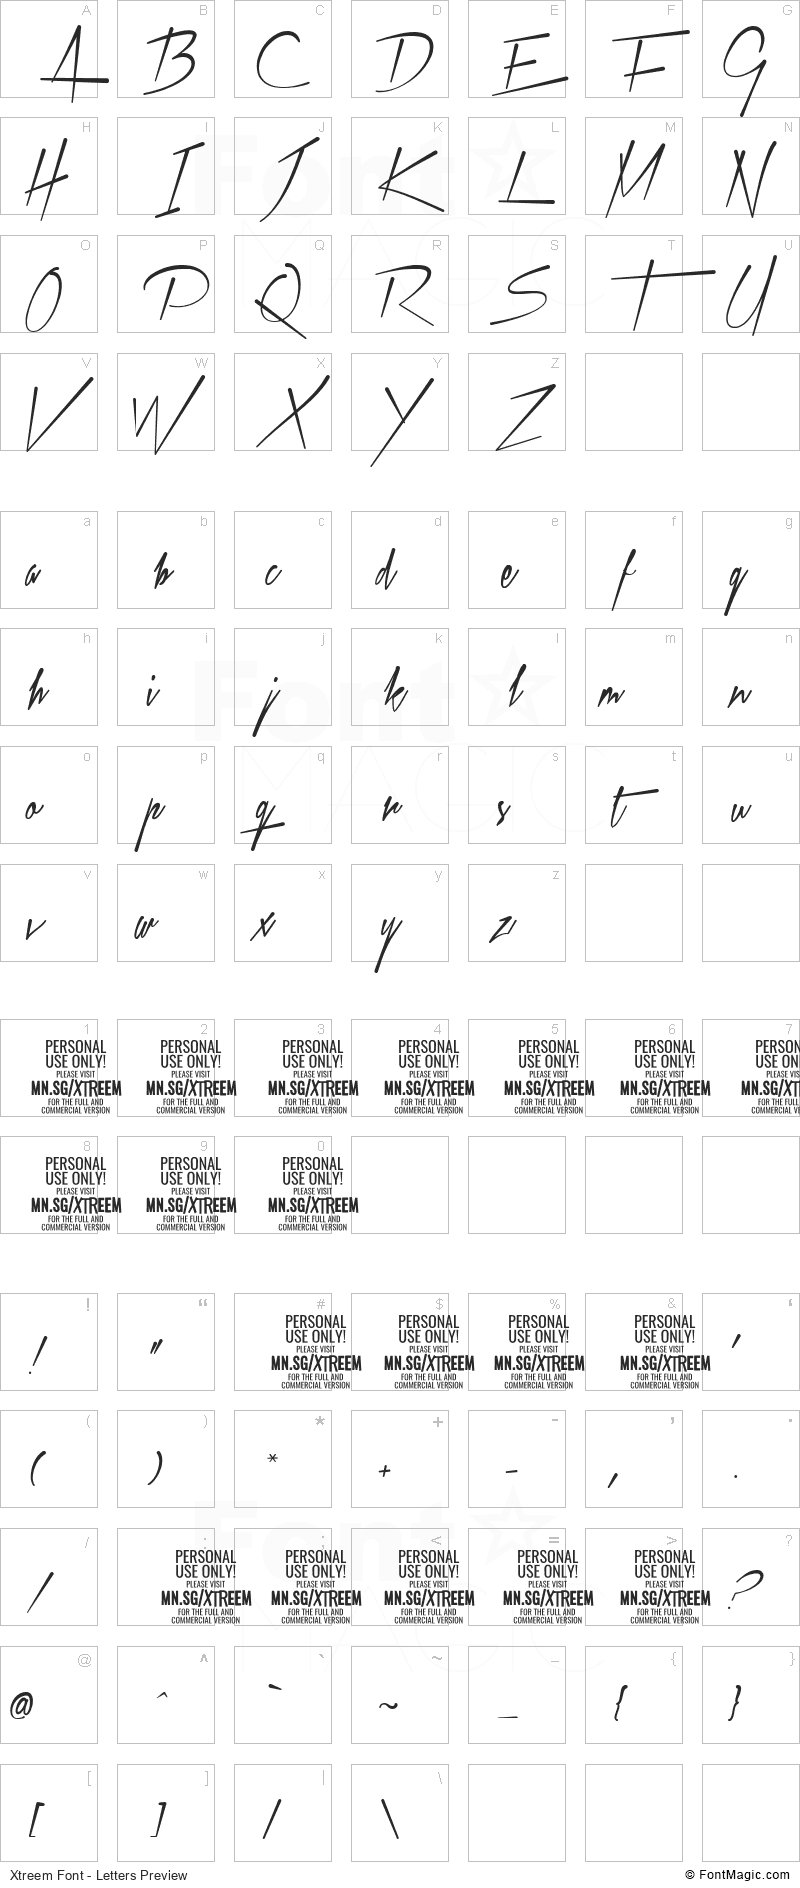 Xtreem Font - All Latters Preview Chart